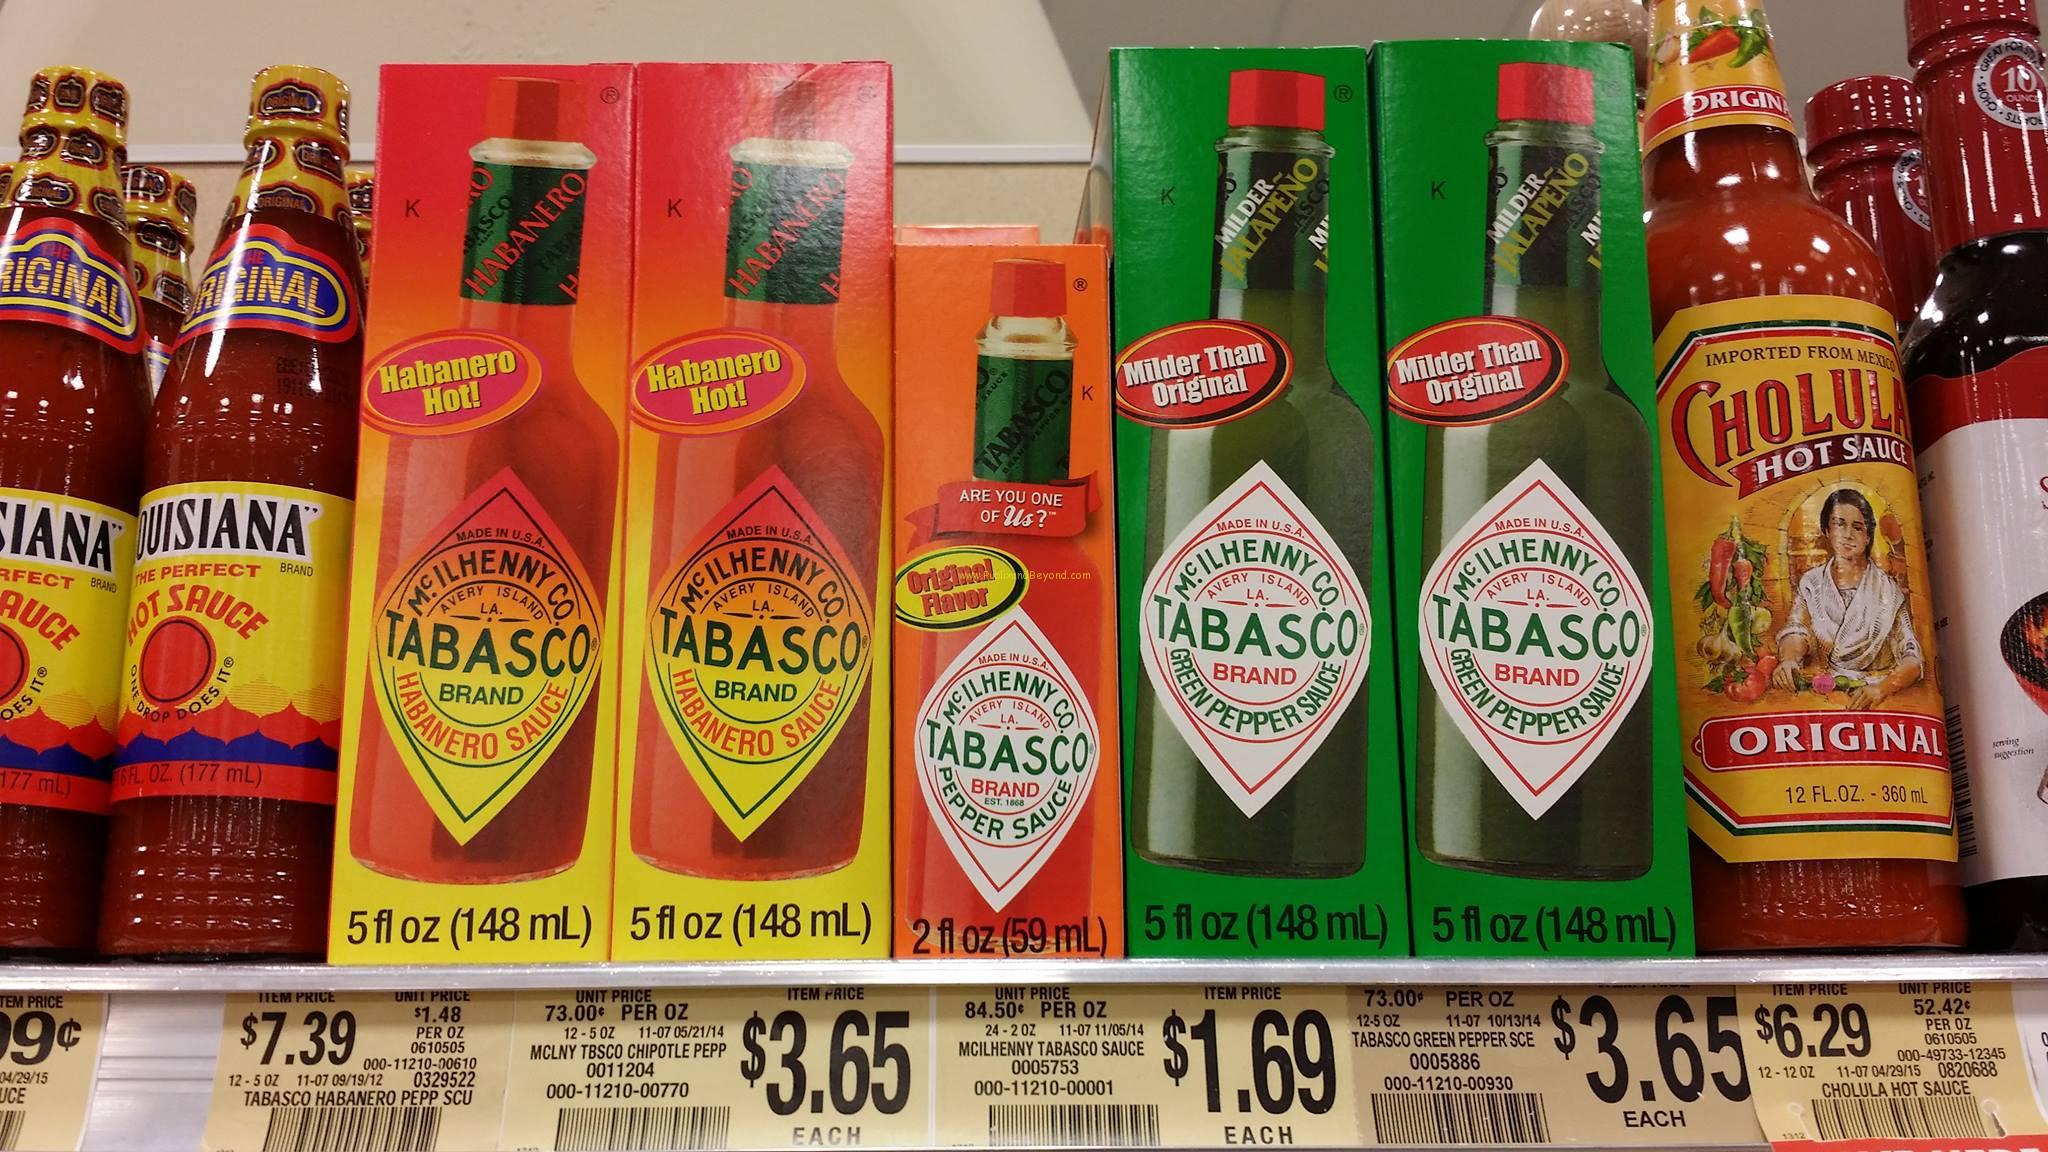 Tabasco Sauce as low 69 each Publix and Beyond